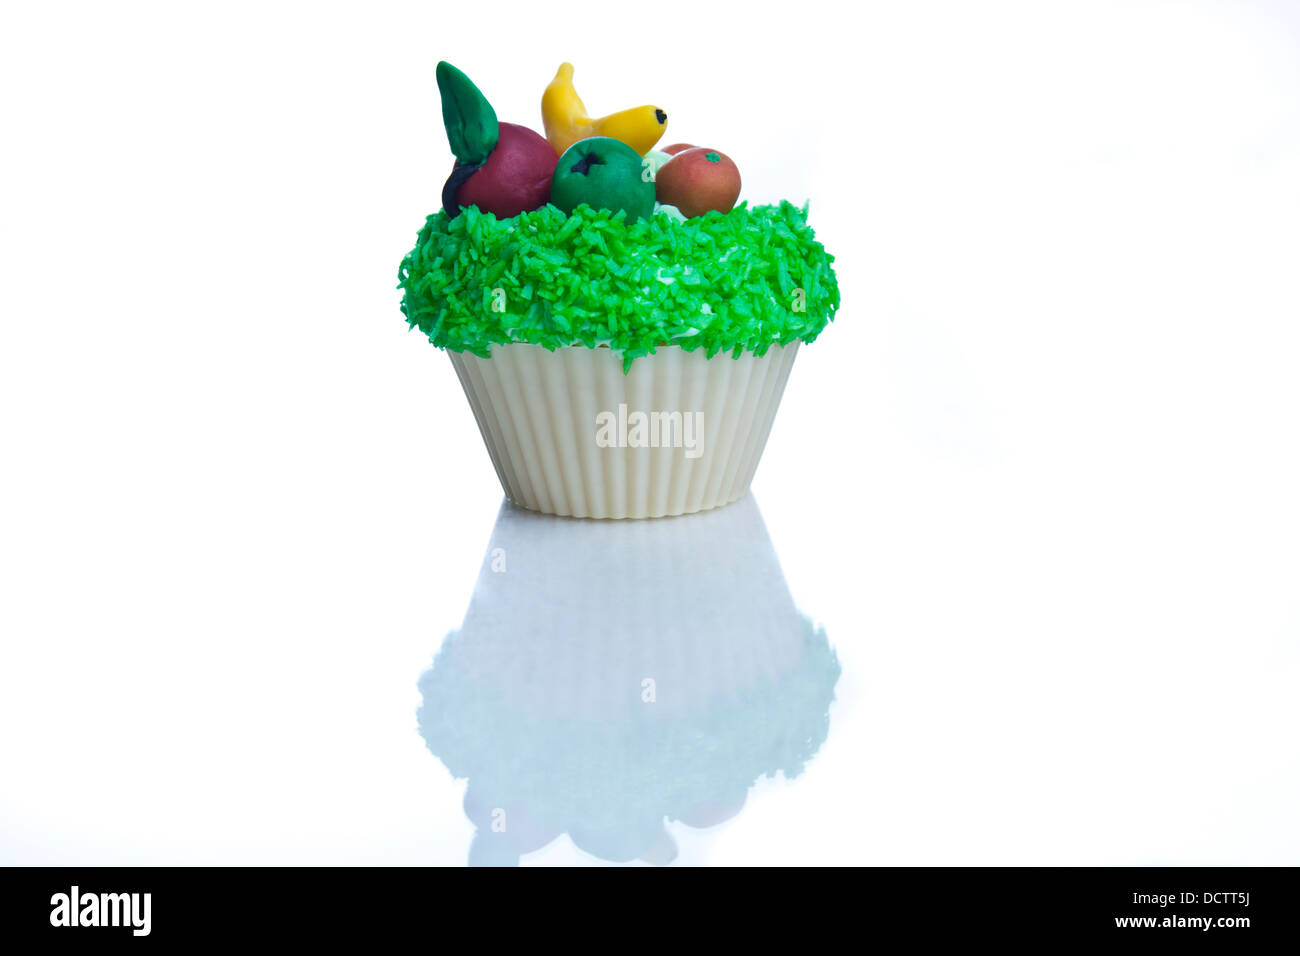 cupcake with icing fruits decoration on white background Stock Photo